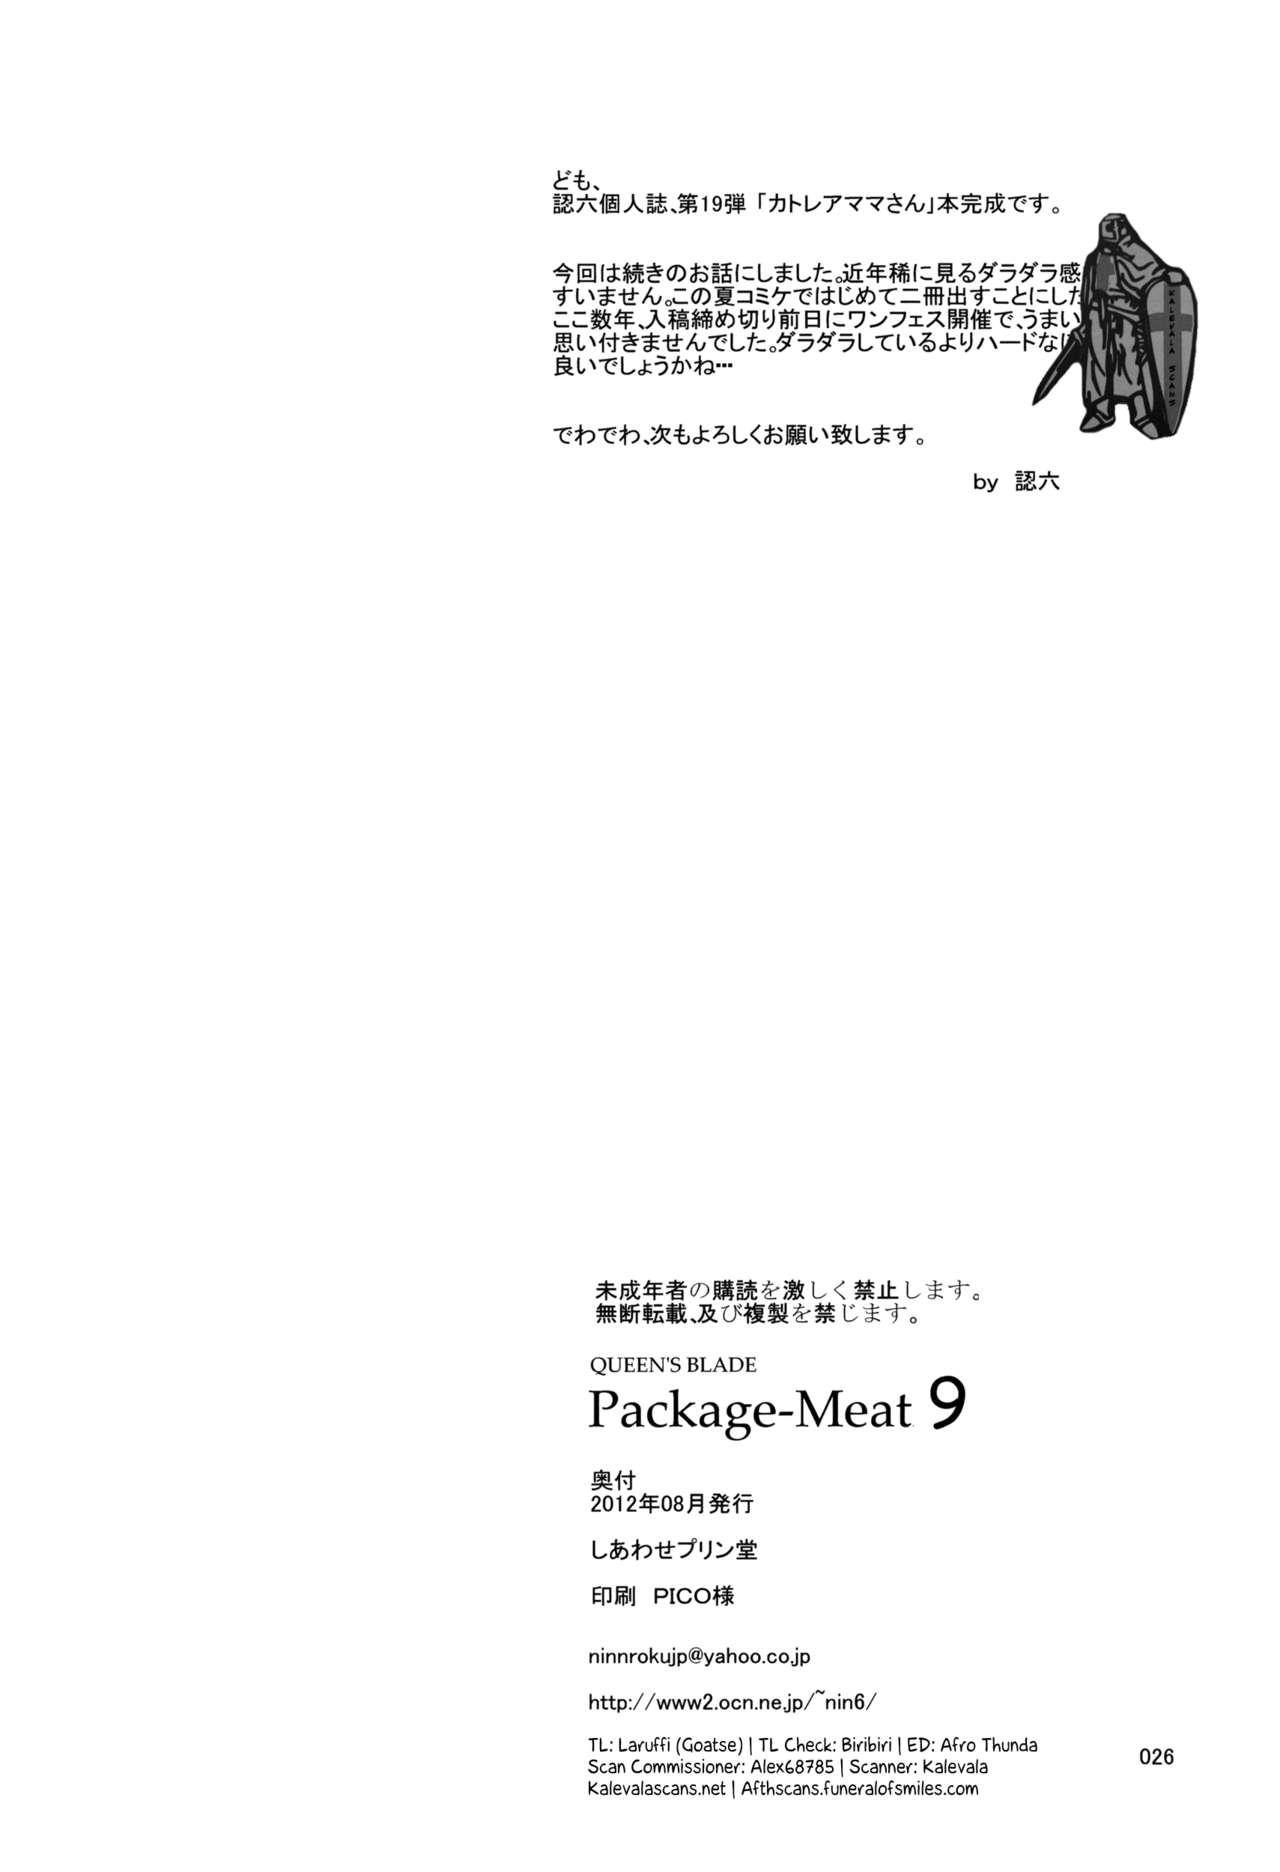 Package Meat 9 25